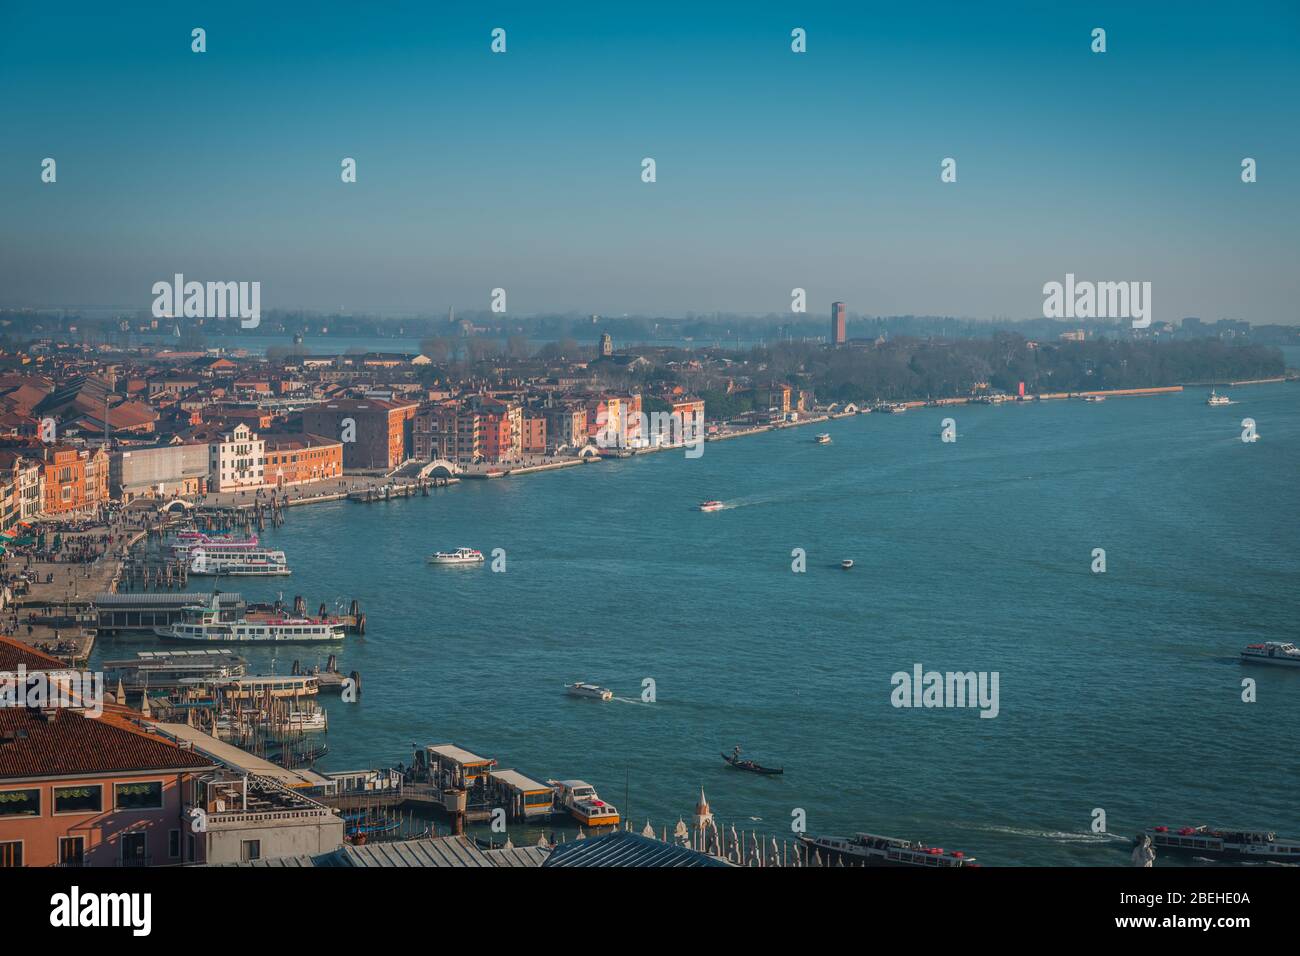 VENICE, VENETO / ITALY - DECEMBER 26 2019: Venice view from the roof before COVID-19 epidemic Stock Photo